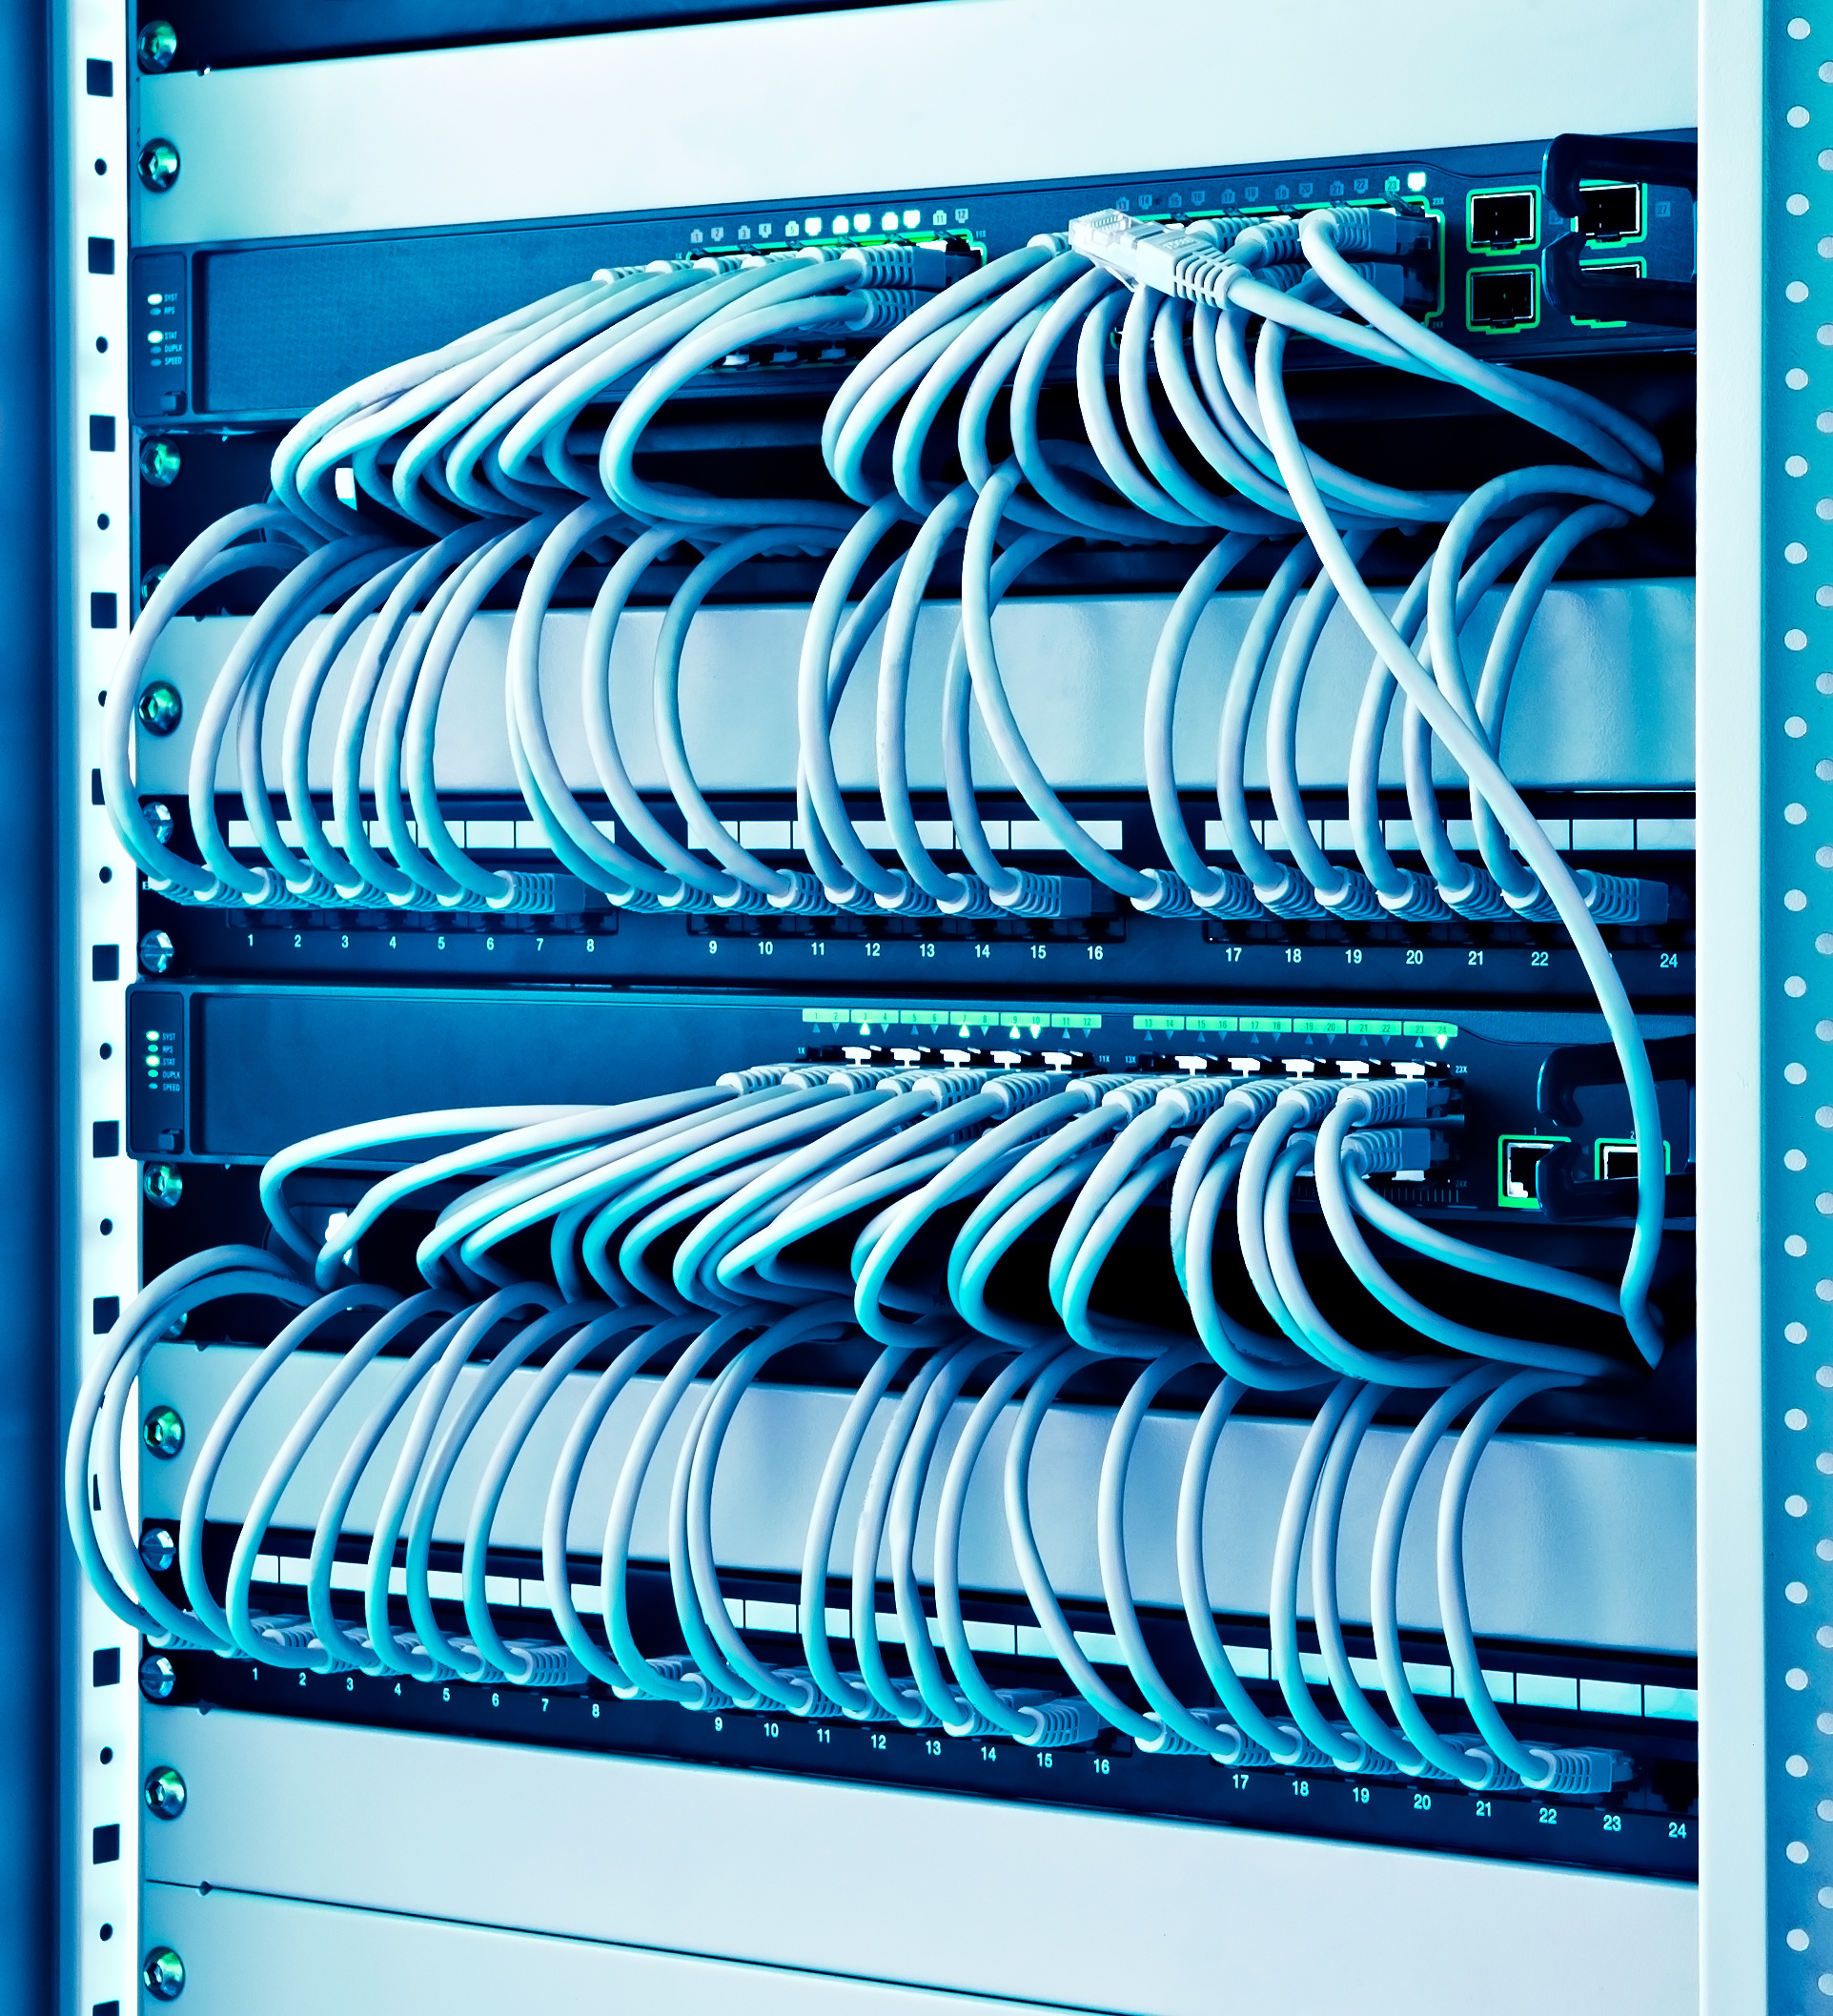 Organized Ethernet cables in switches